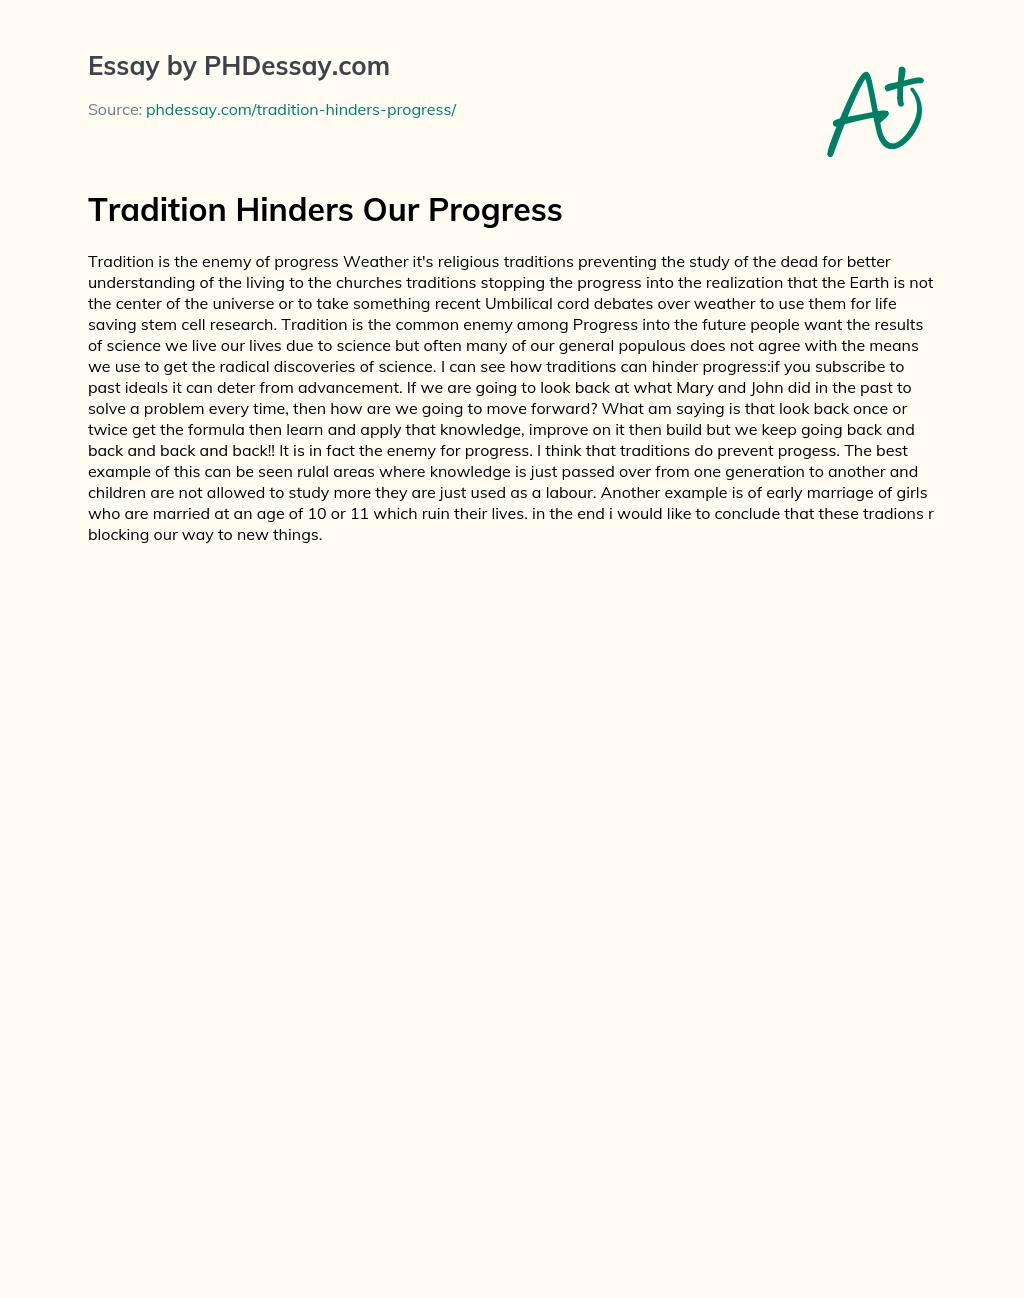 Tradition Hinders Our Progress essay